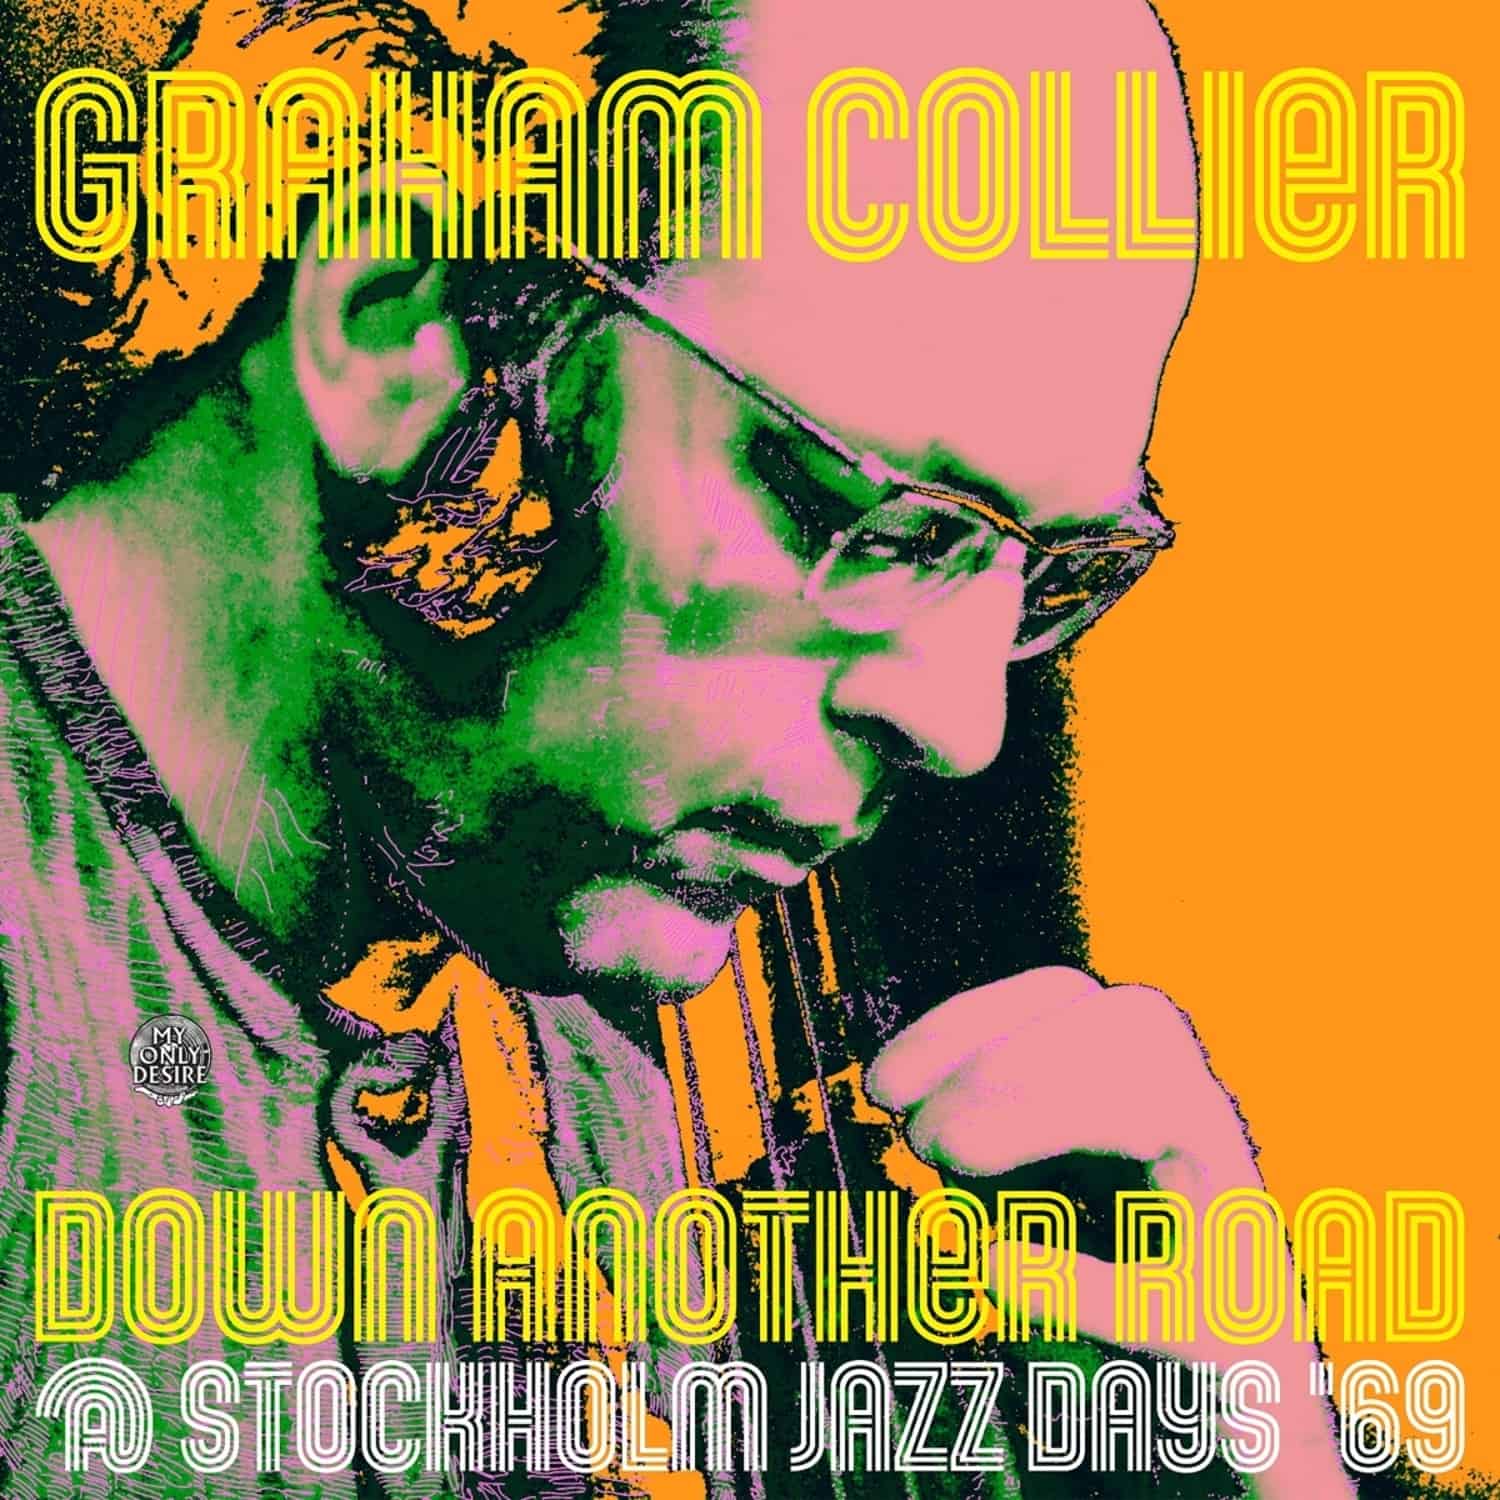  Graham Collier - DOWN ANOTHER ROAD @ STOCKHOLM JAZZ DAYS 69 